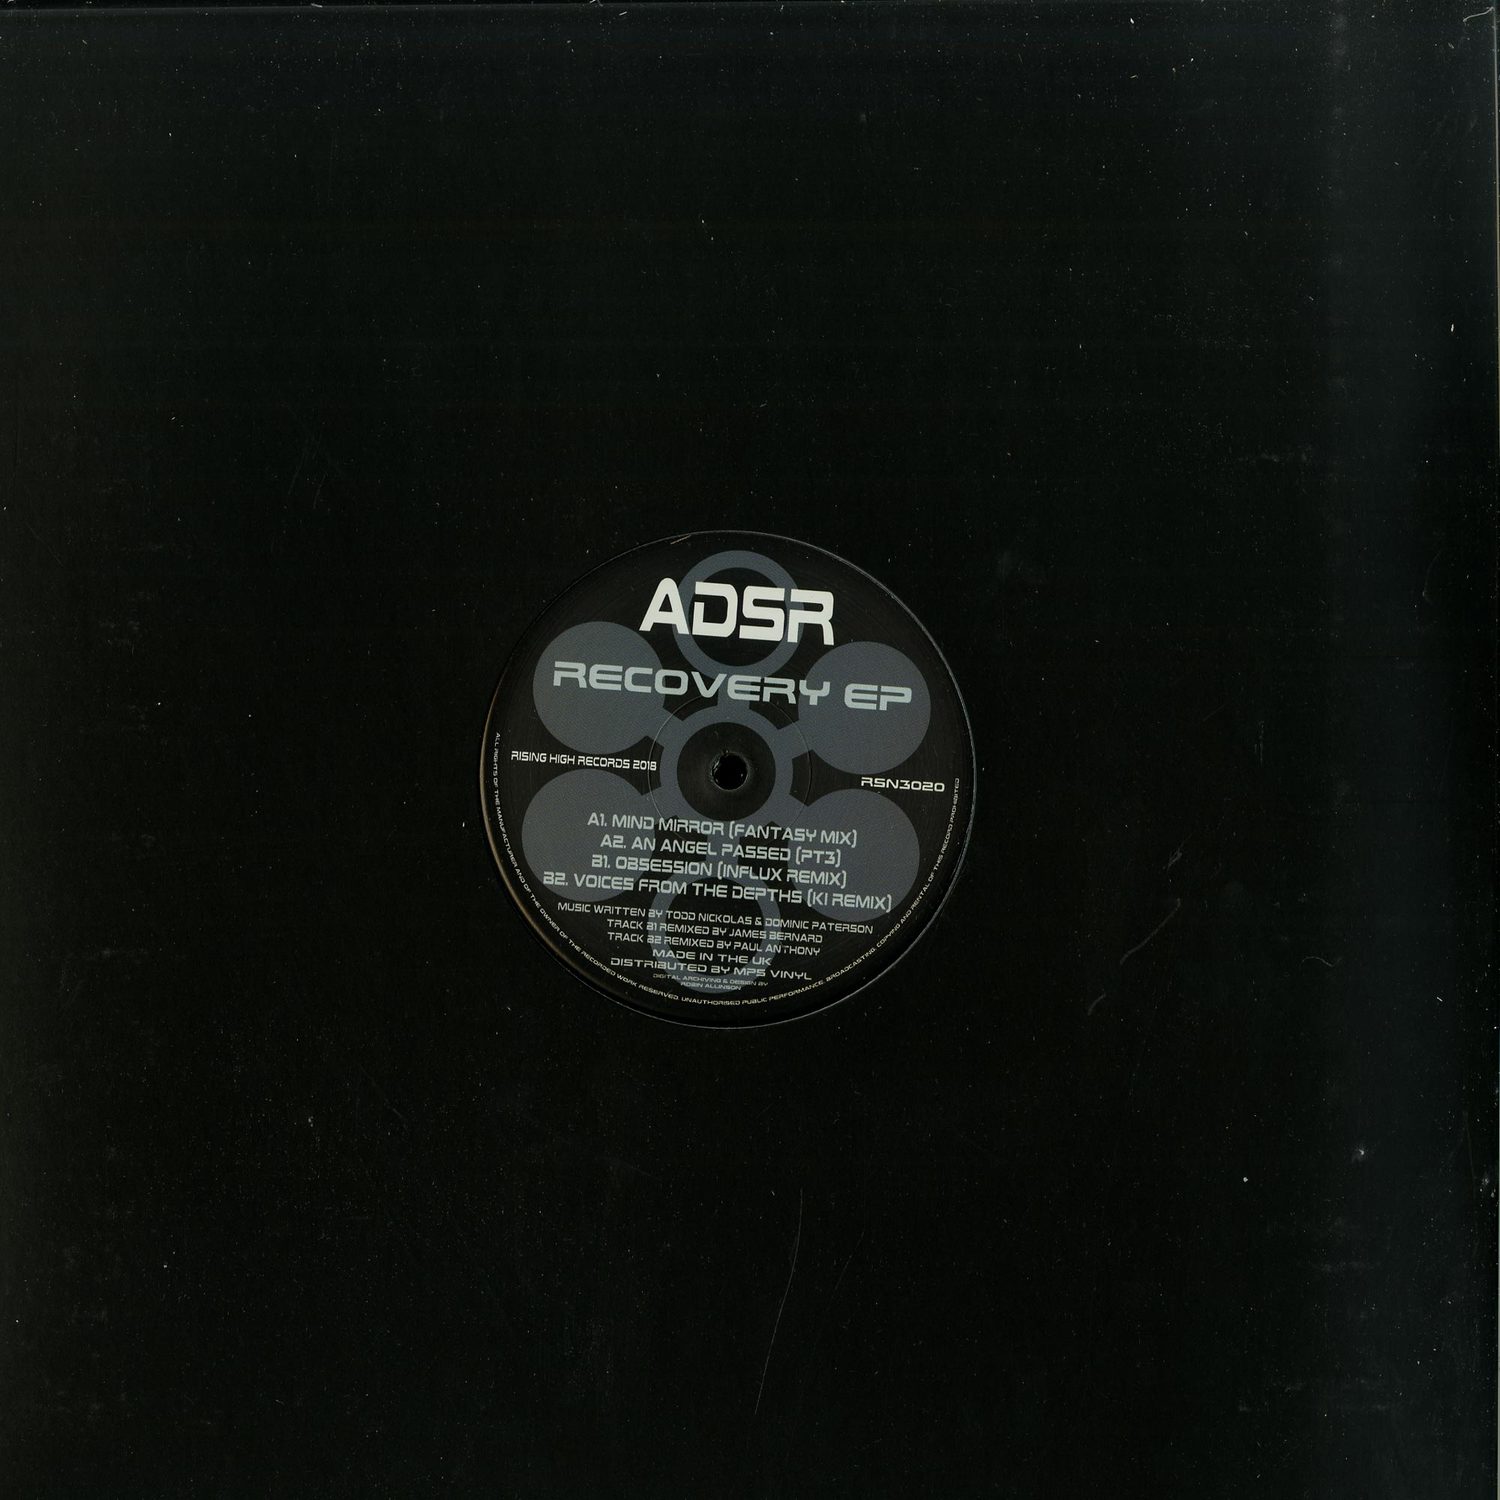 ADSR - RECOVERY EP